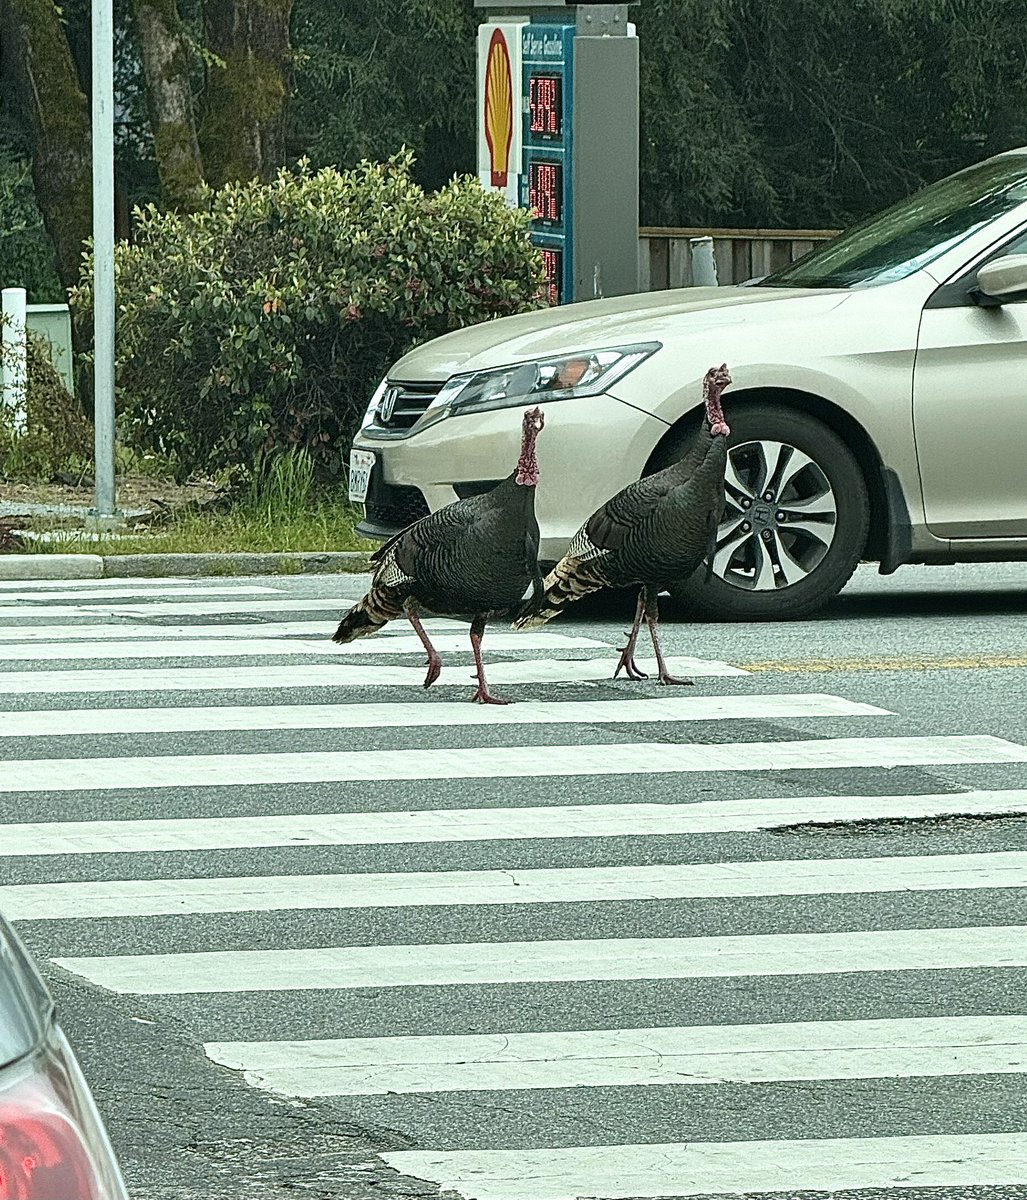 Traffic is so bad in Felton that turkeys are using the crosswalk to safely get across Graham Hill Road!